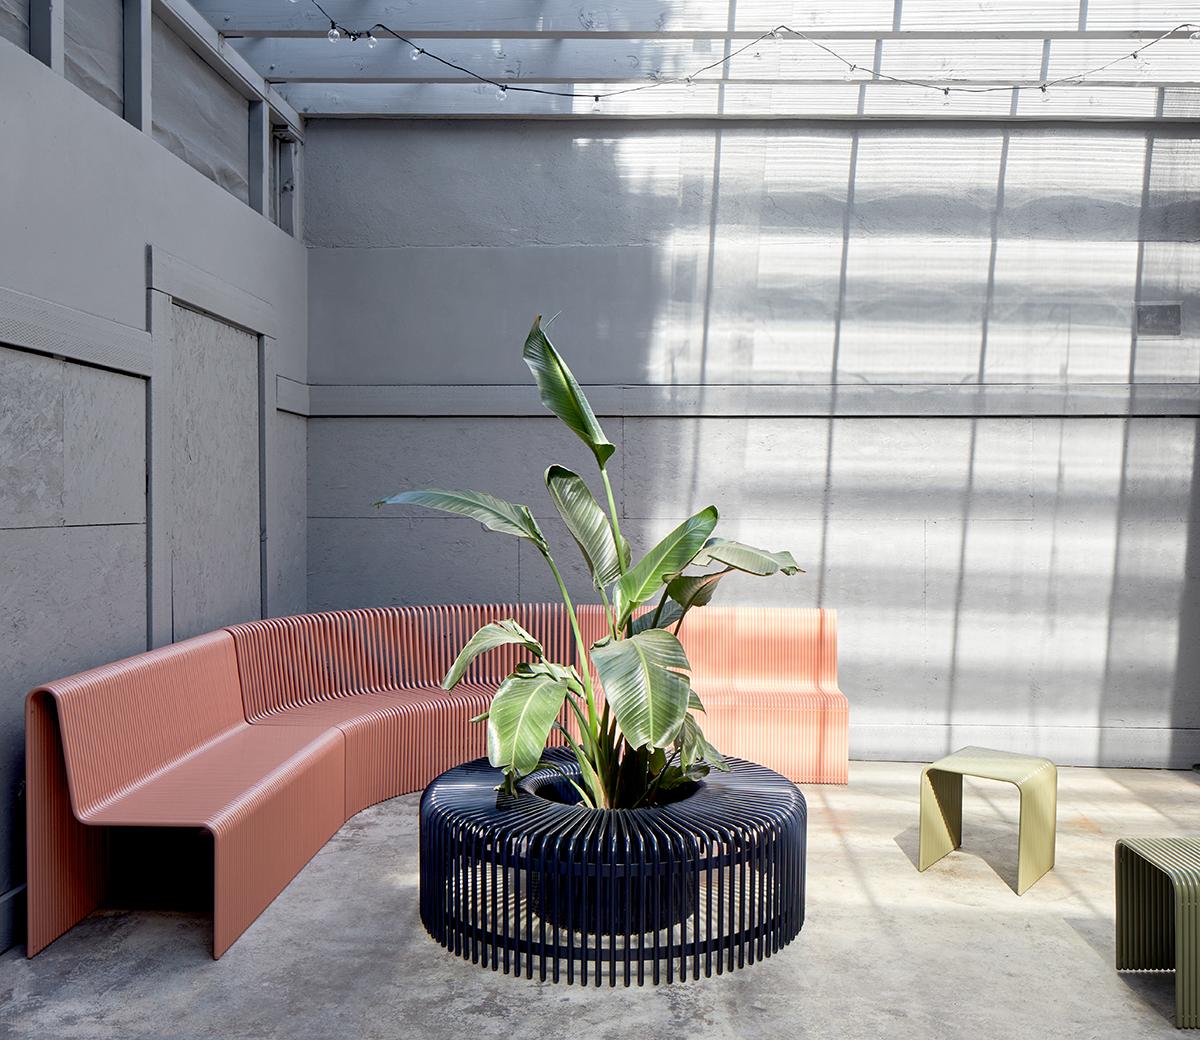 In the Ribbon outdoor bench, layered aluminum tubes stack together to form a circular semi-solid array, with an empty space in the center that can accommodate an optional plant. The bench is offered in five standard colors, but can be color-matched,